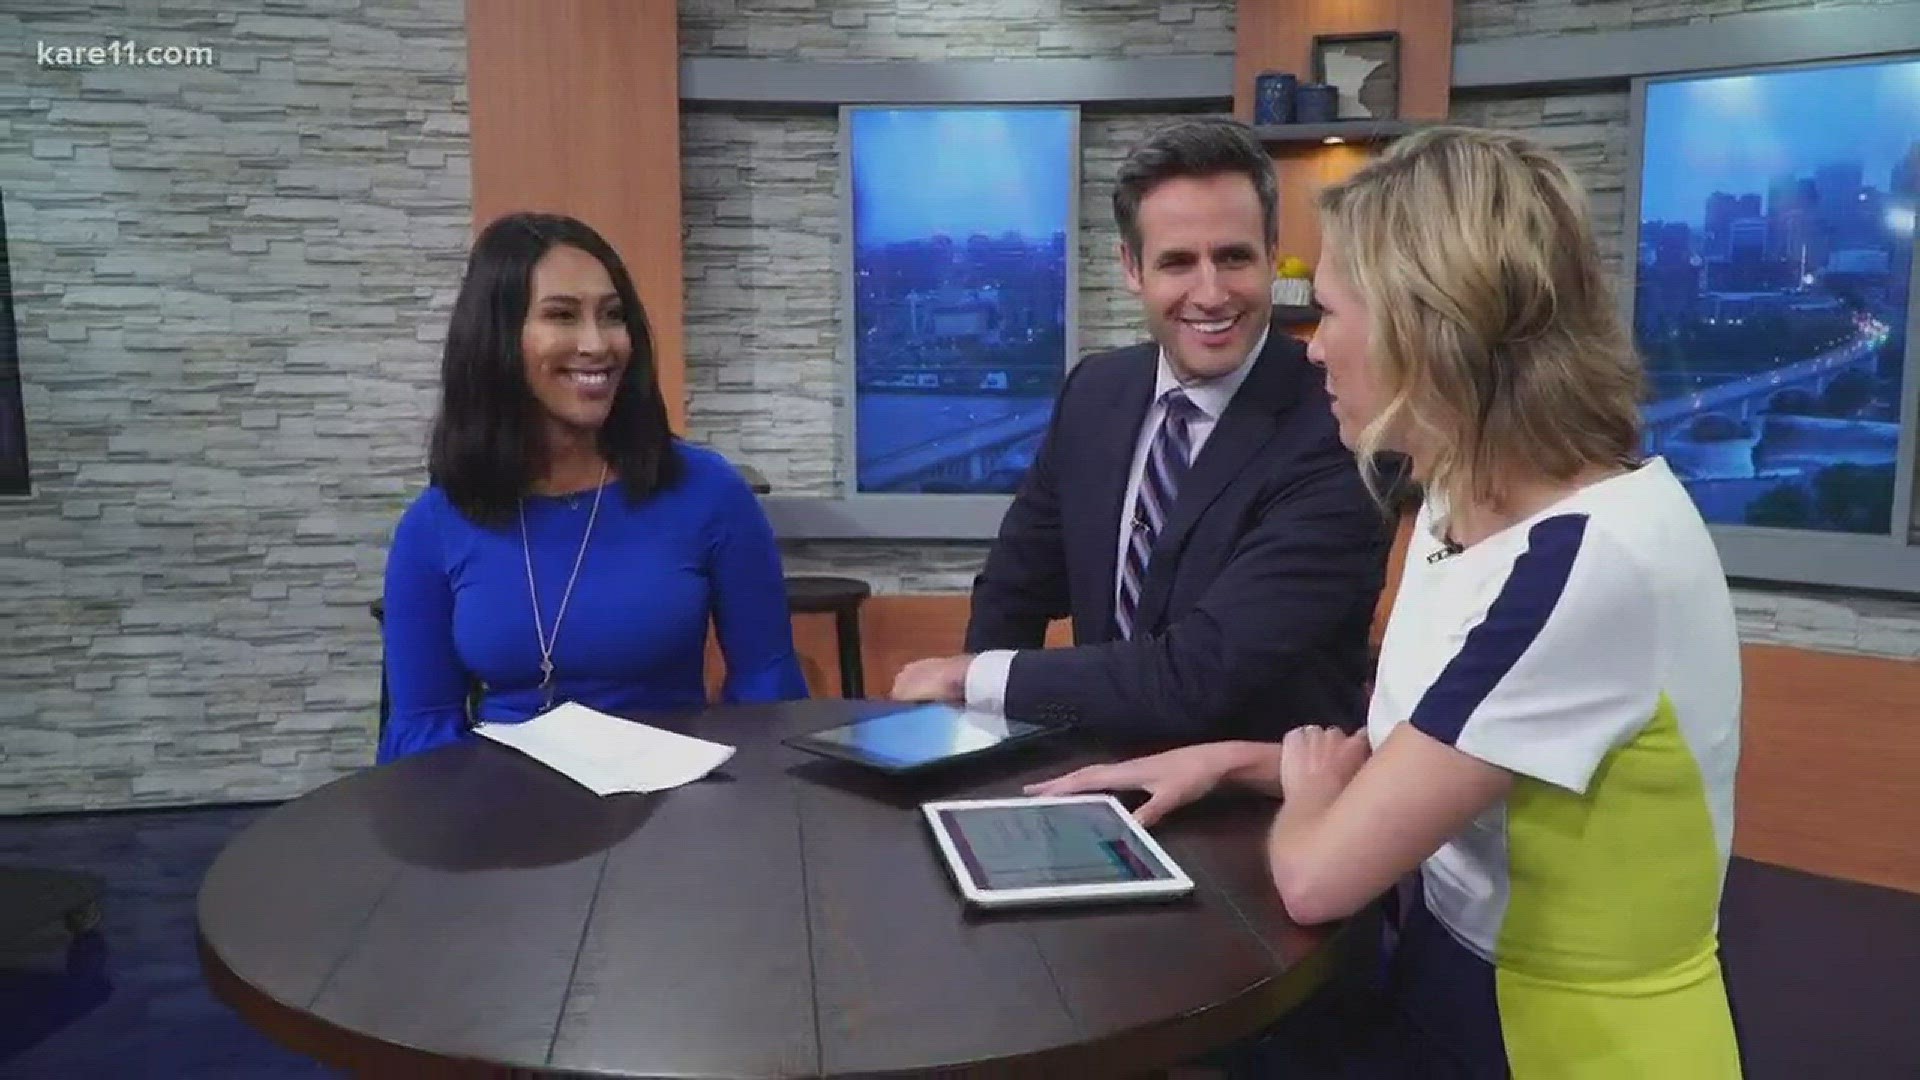 Welcome to the newest member of our KARE 11 Sunrise team, Kiya Edwards! She is a Minnesota native who says she's excited to be home. Say hello on Facebook: https://www.facebook.com/kiyakare11/� Subscribe to KARE 11: https://www.youtube.com/subscription_